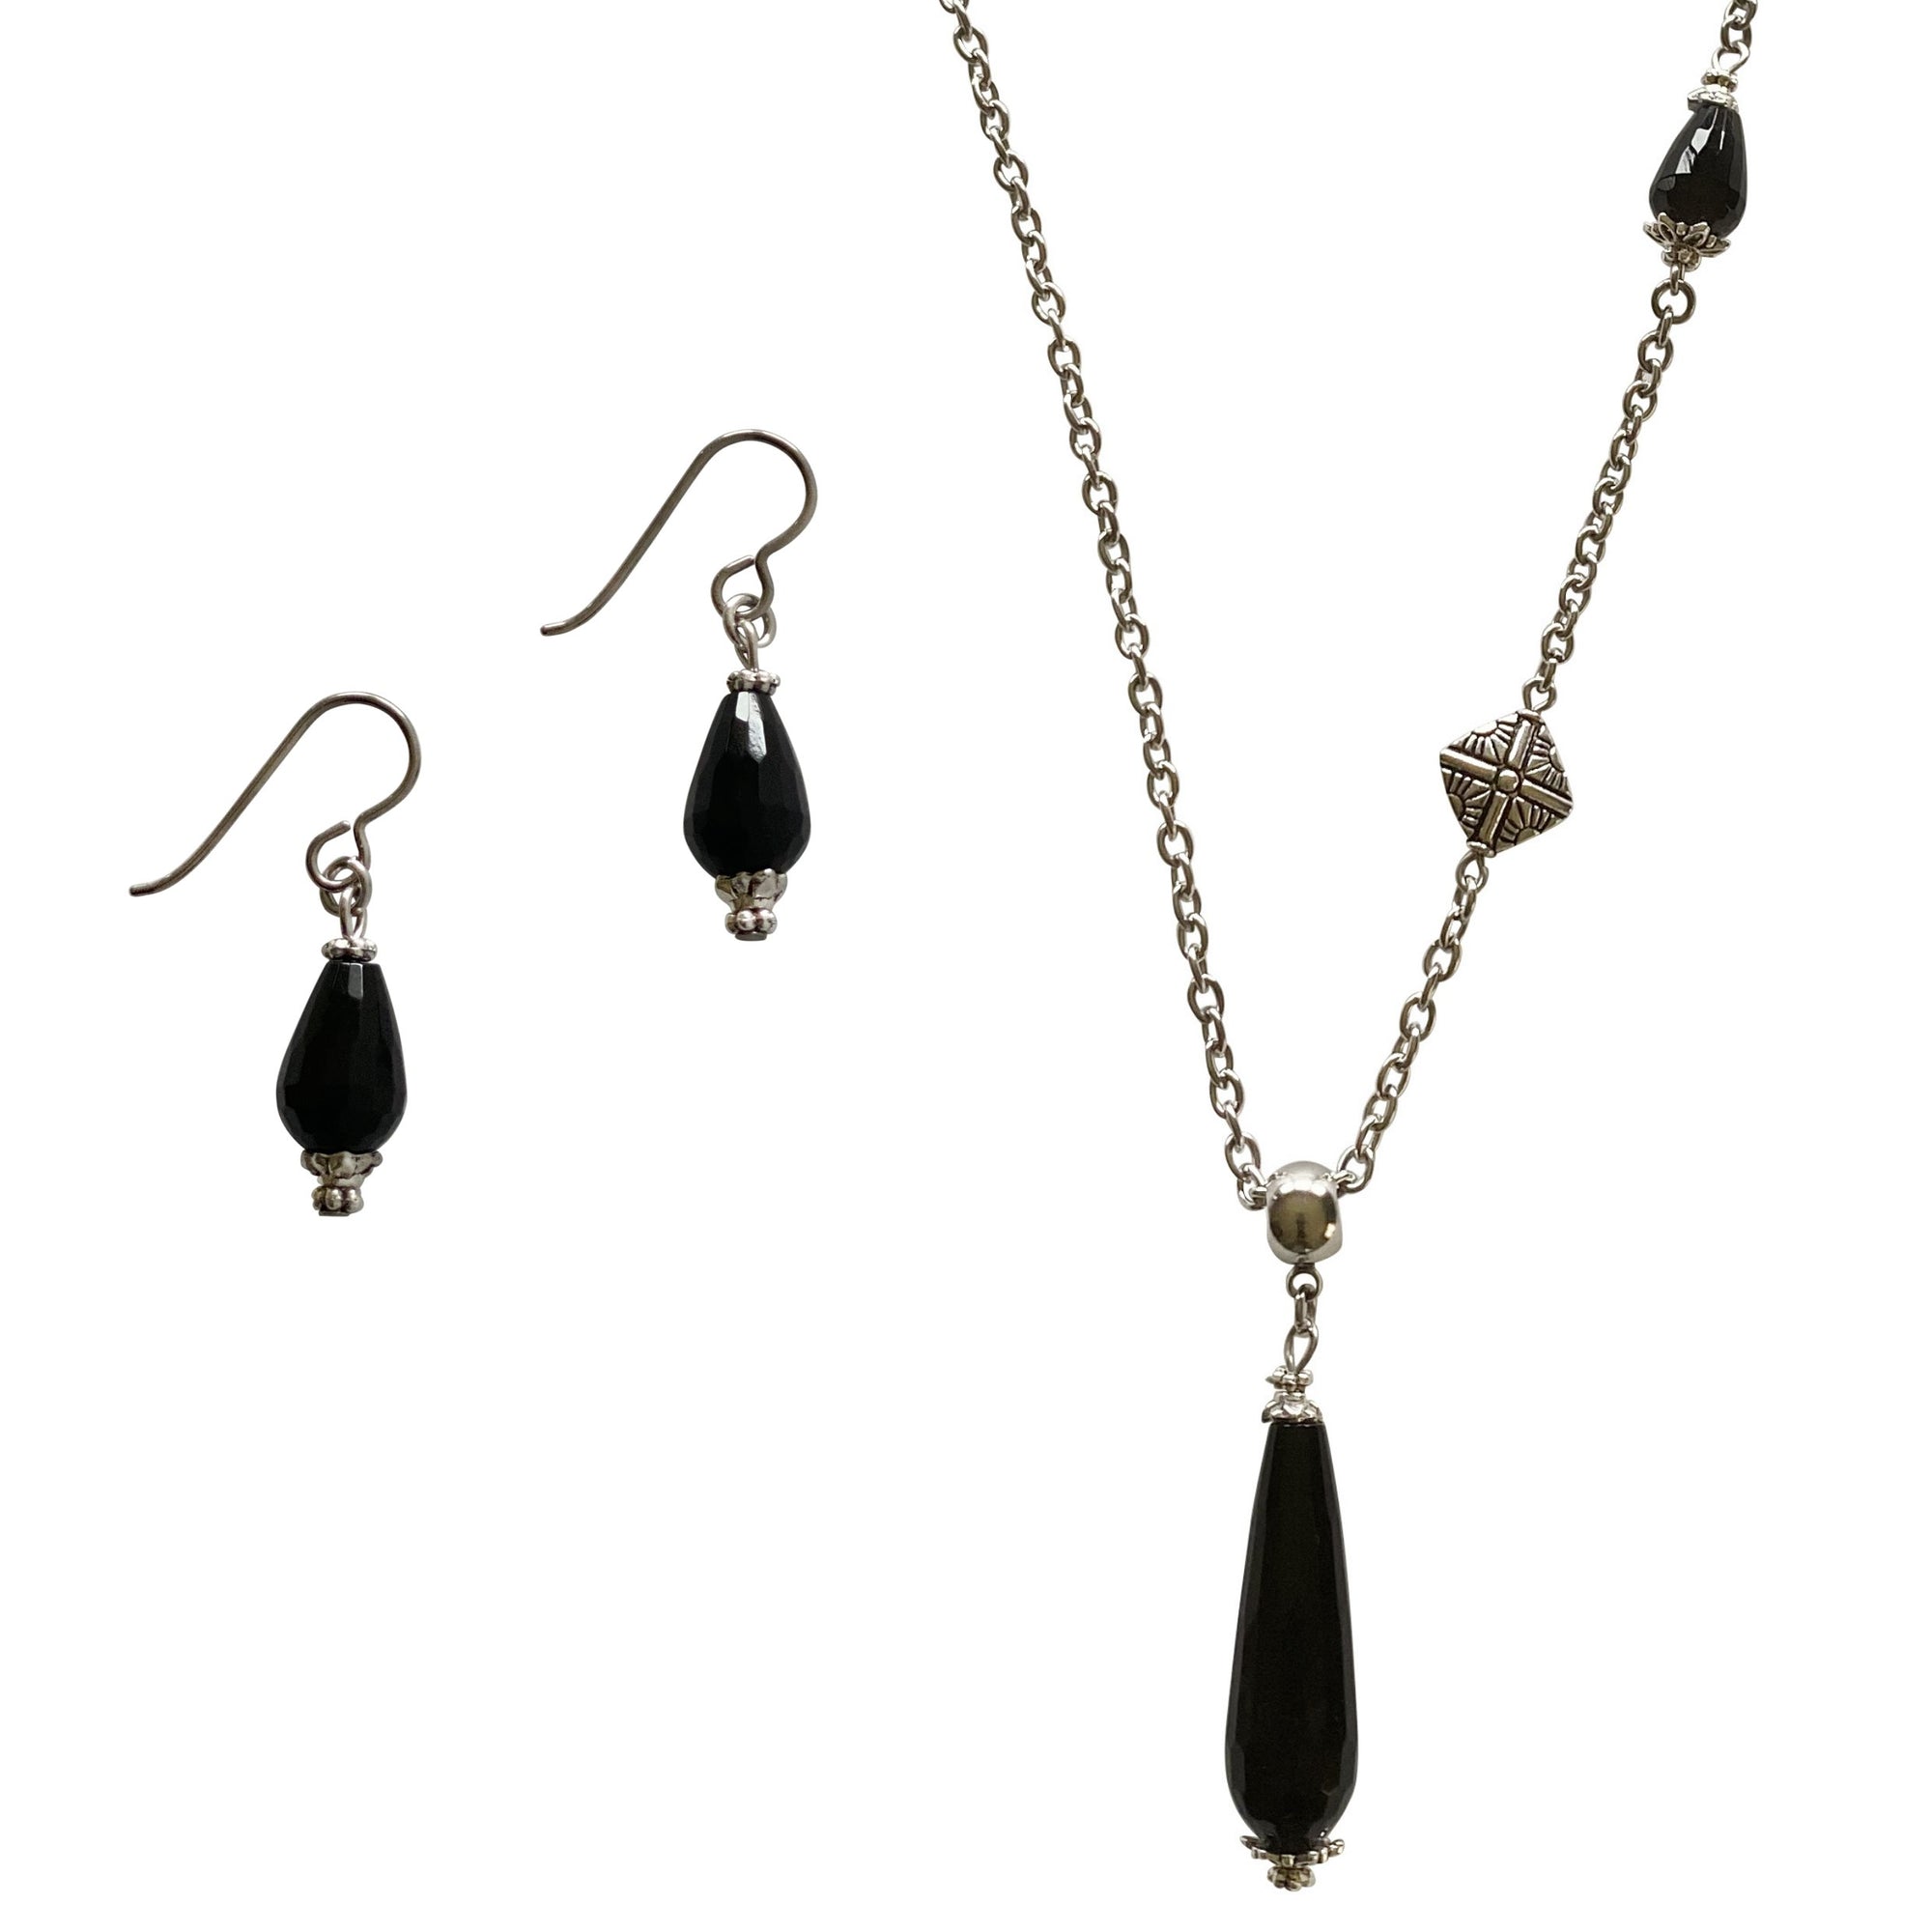 Black Onyx Necklace and Black Onyx and Silver Chain bracelet with toggle clasp. Both of these pieces use thinner stainless steel chain.